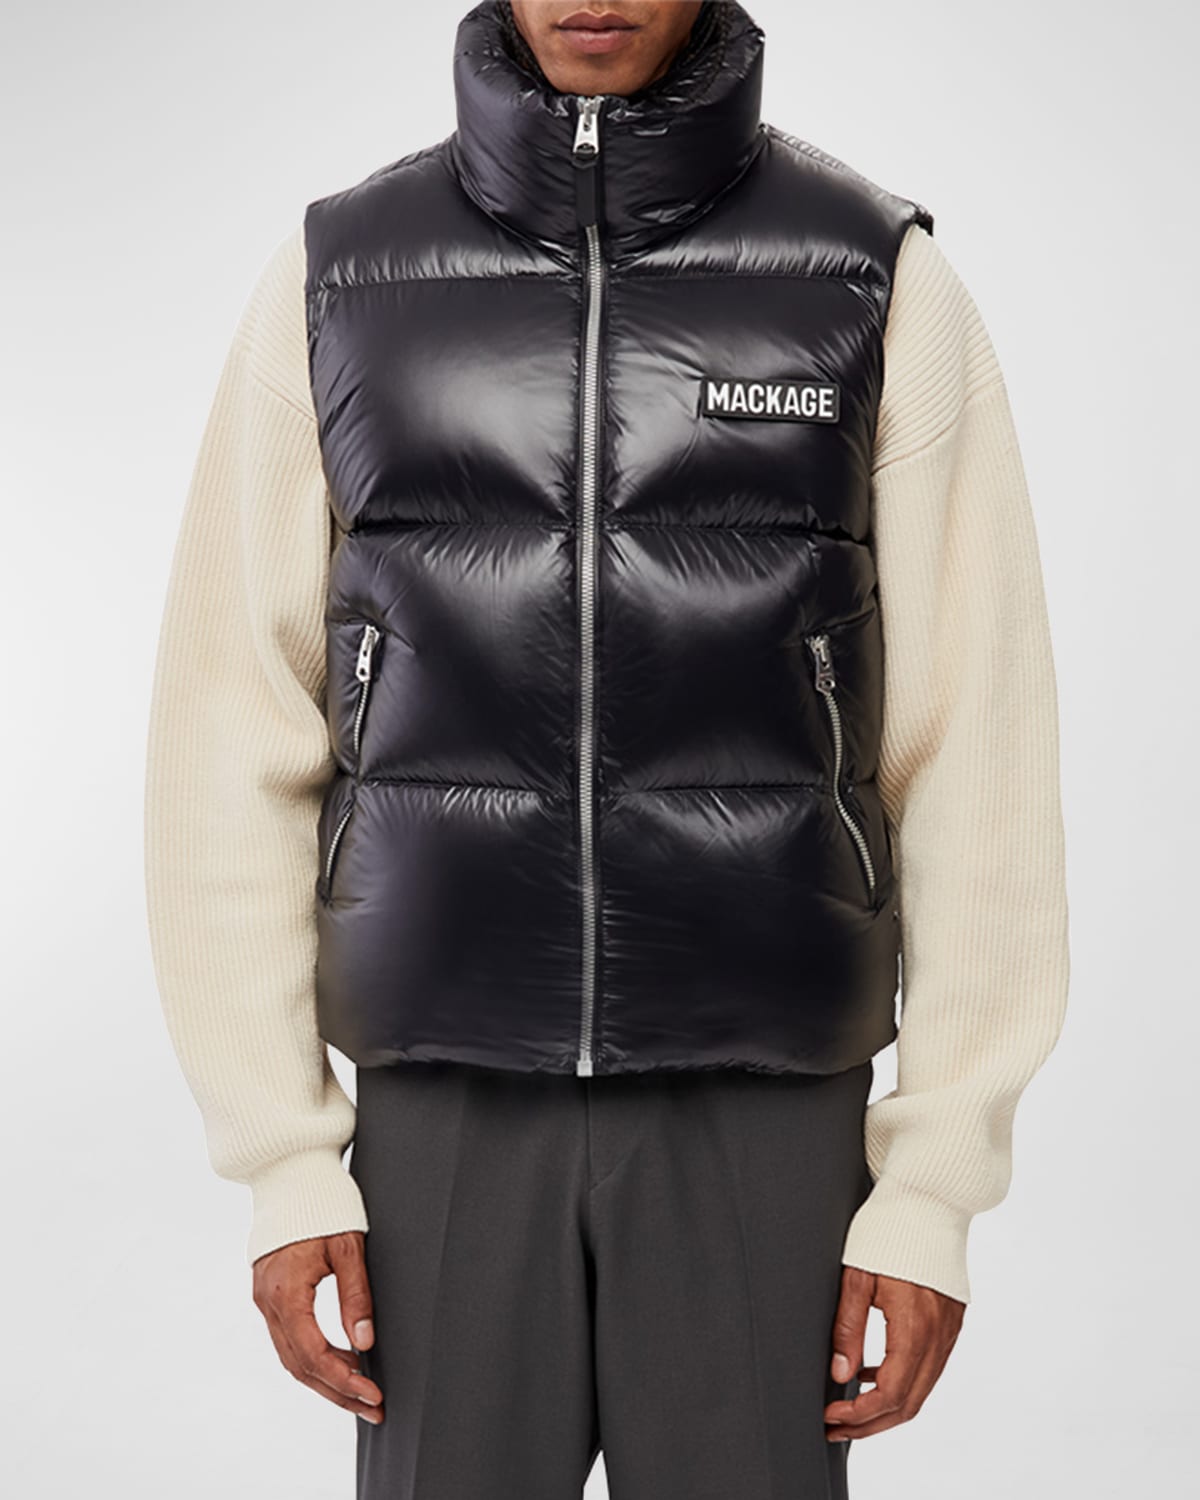 Mackage Men's Hardy Quilted Down Puffer Vest | Neiman Marcus